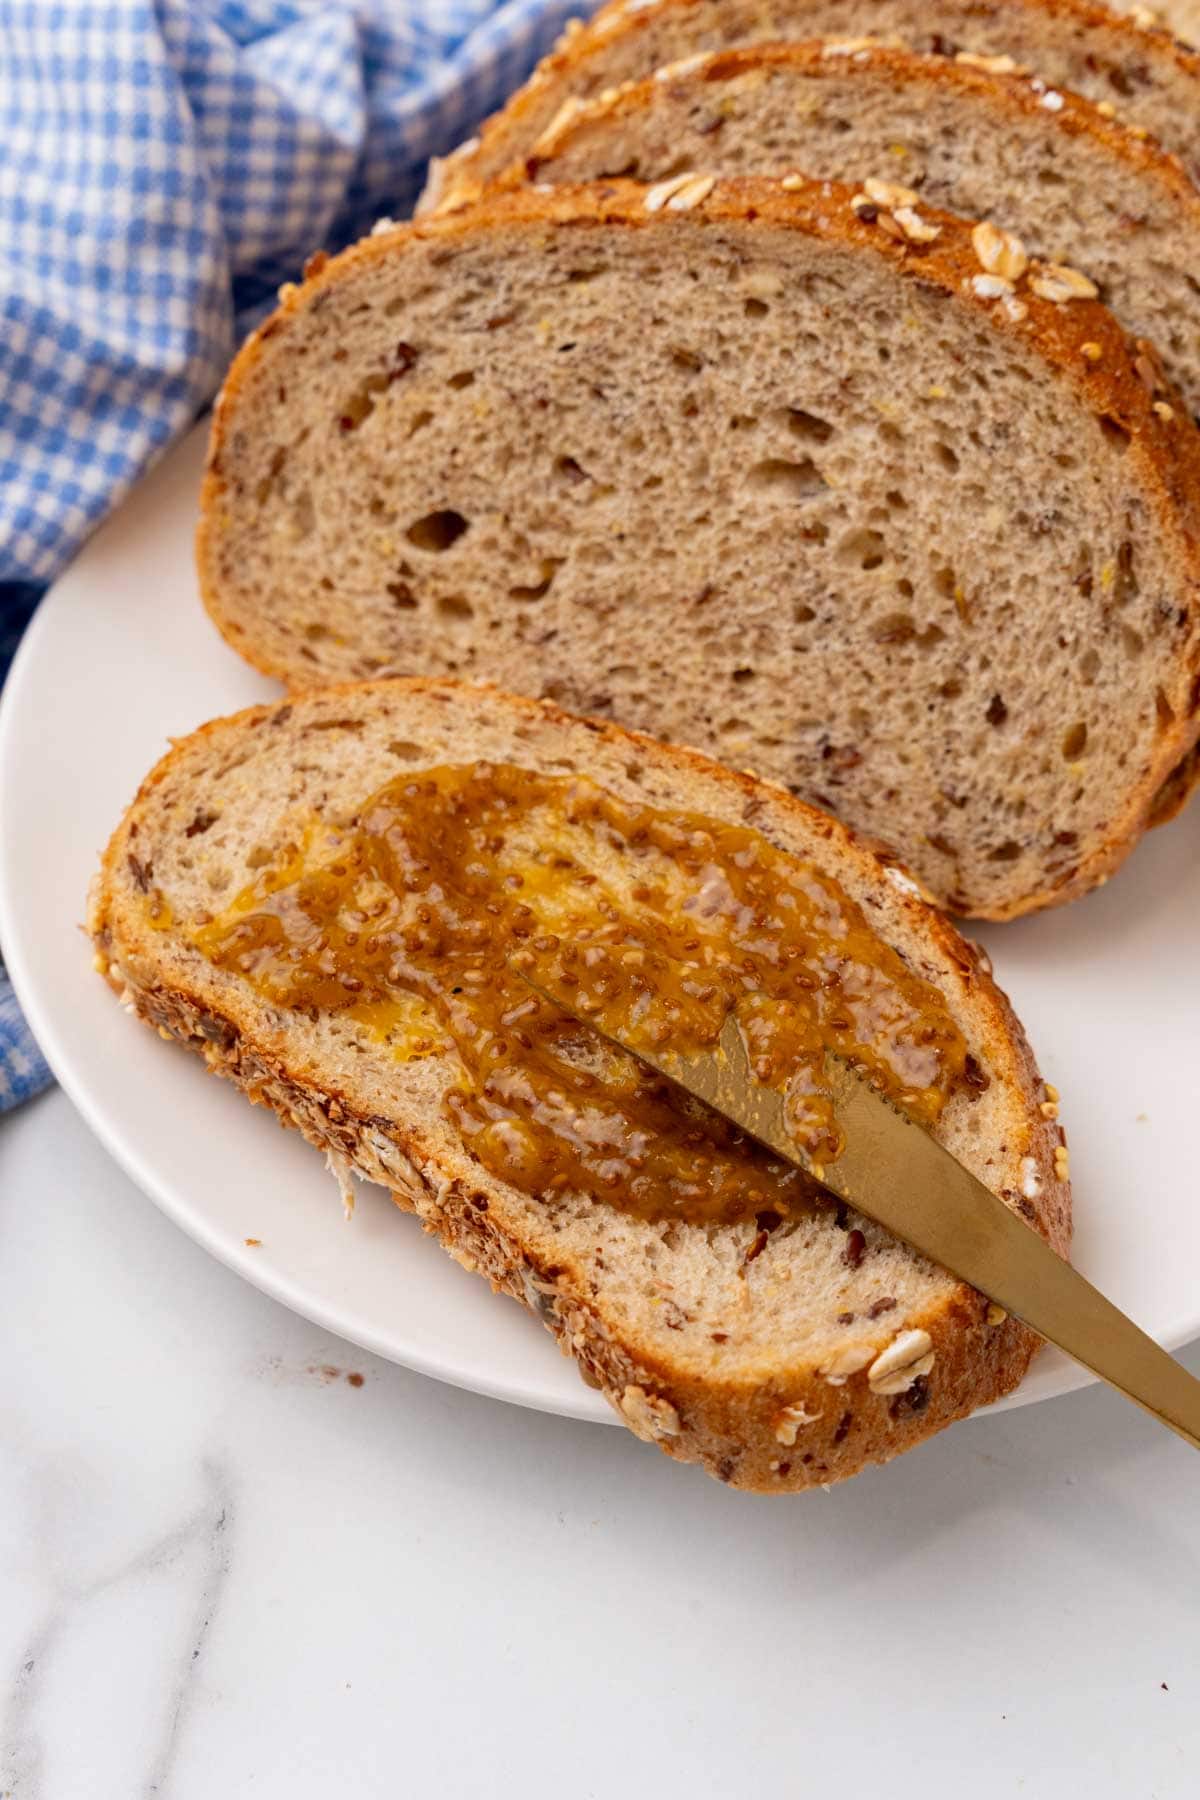 Jam being put on piece of bread with a knife